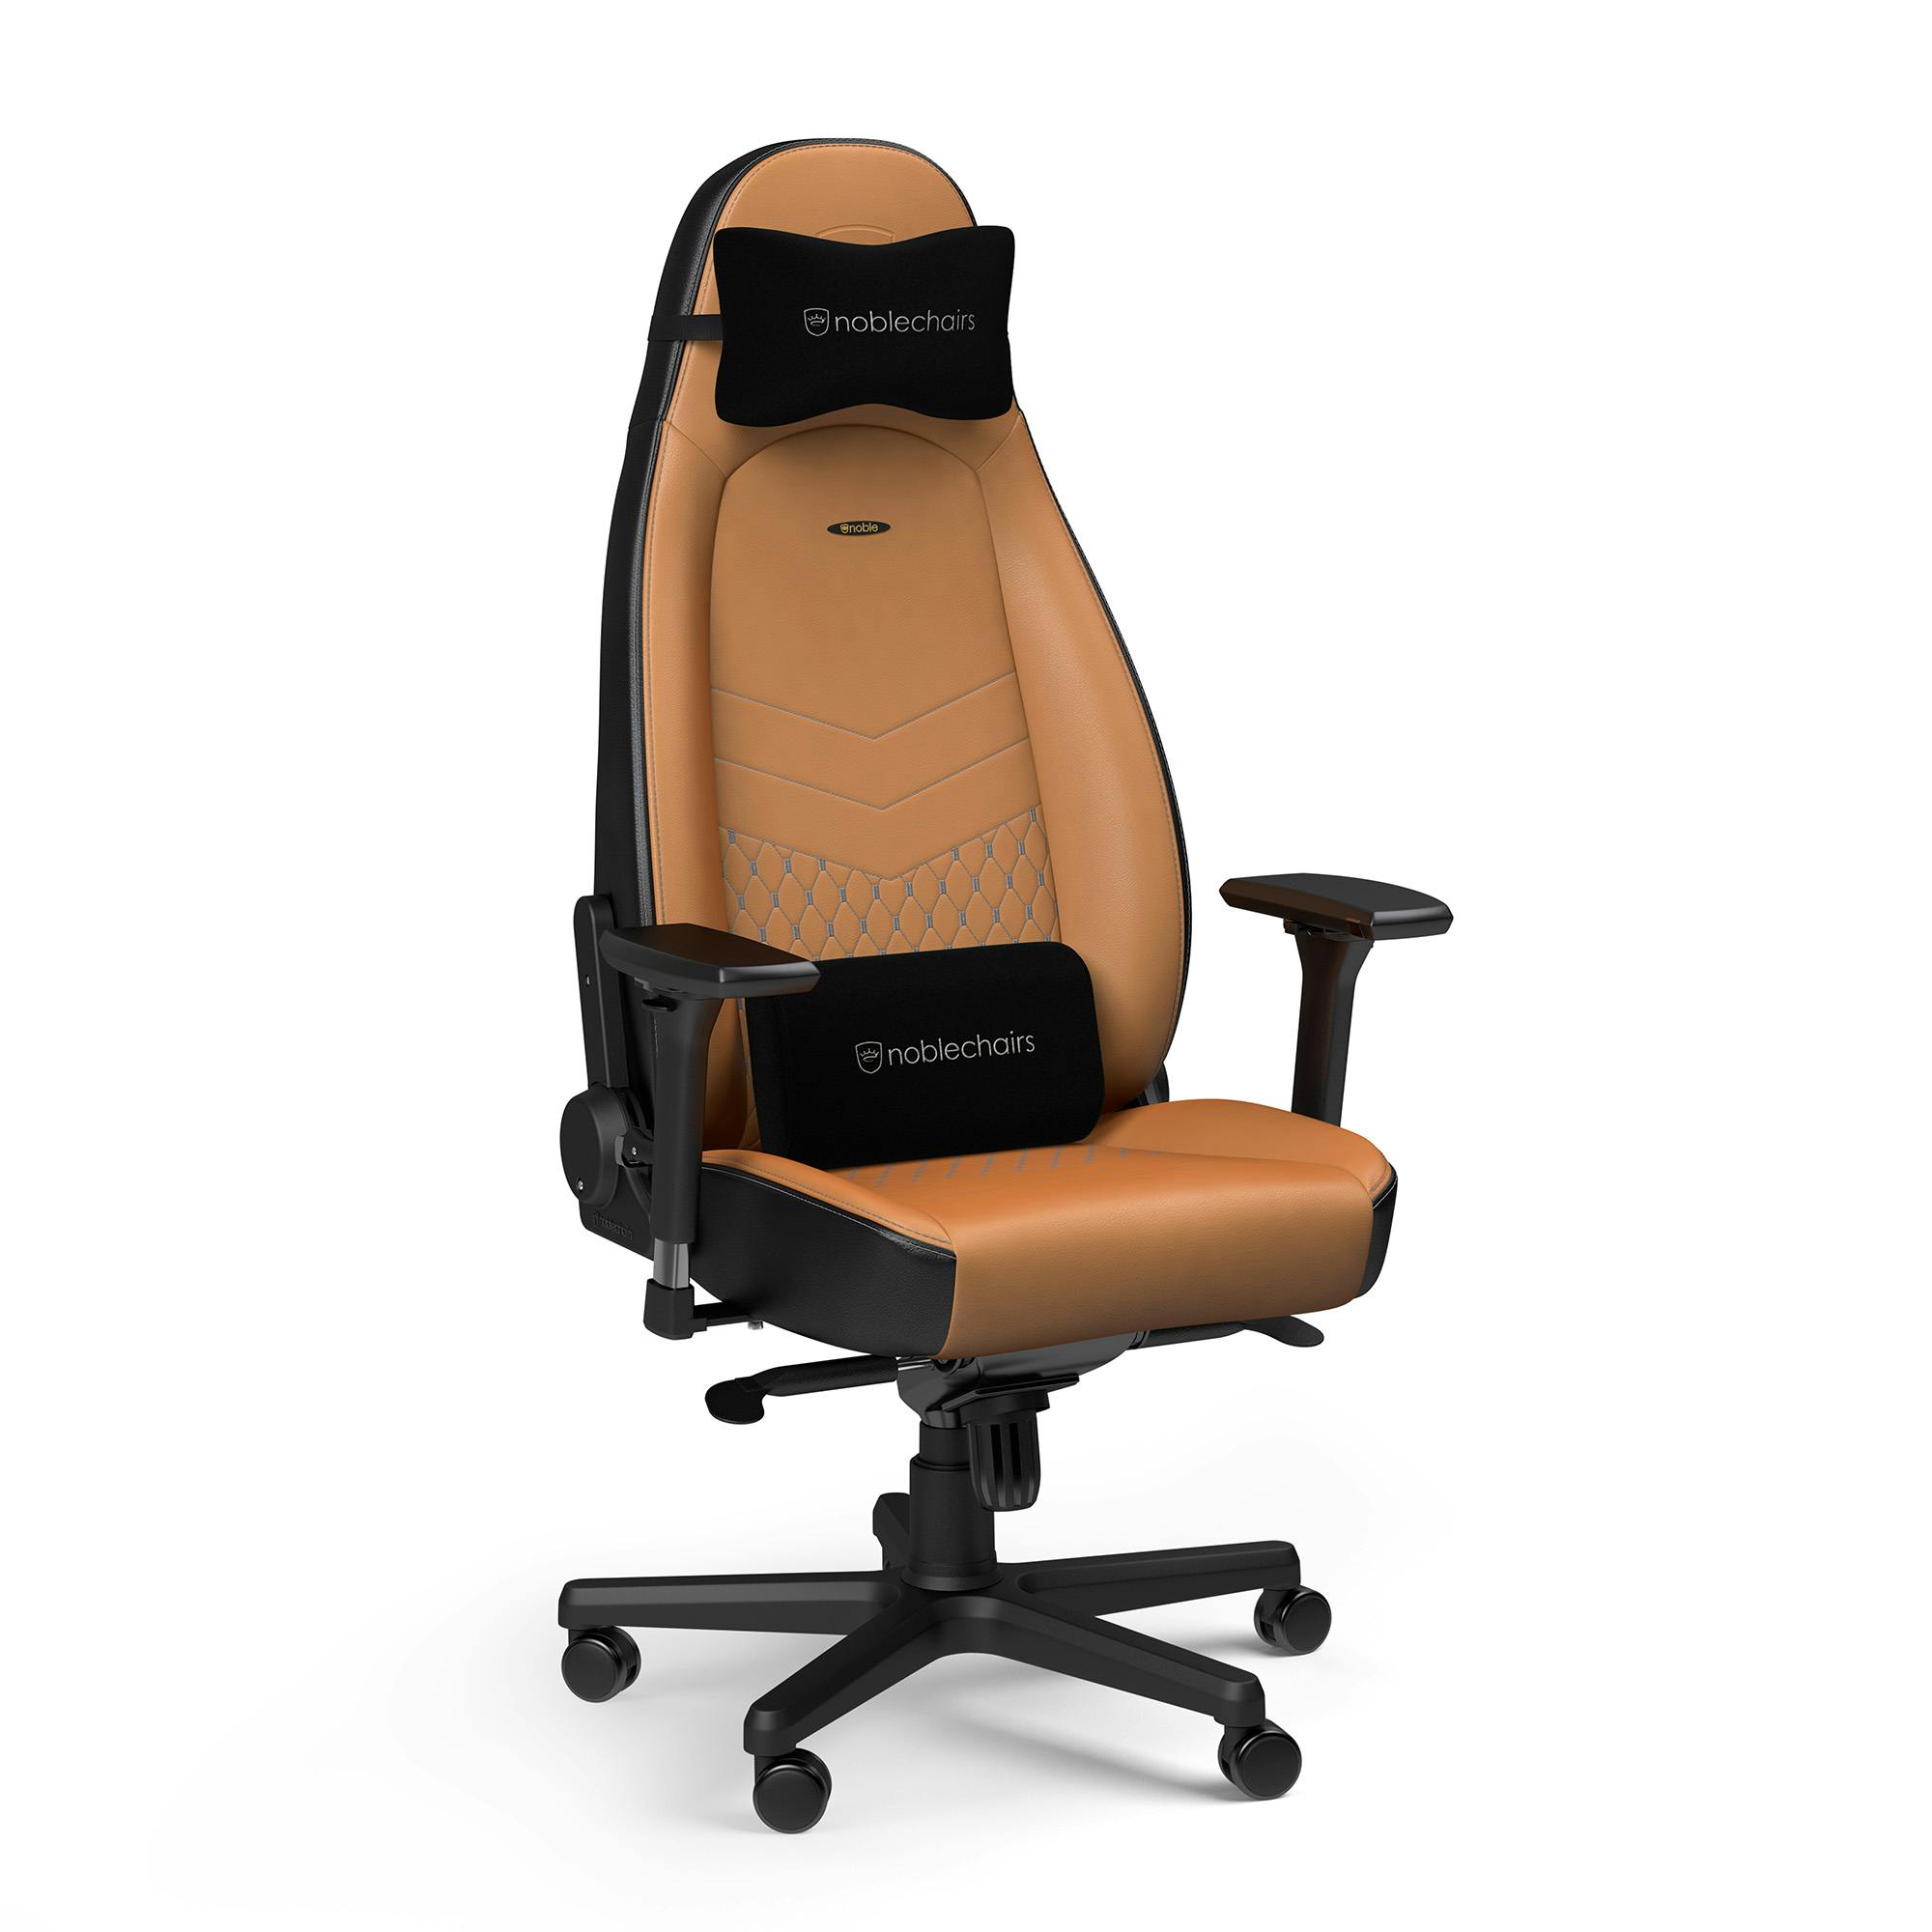 noblechairs - ICON Real Leather Cognac/Black